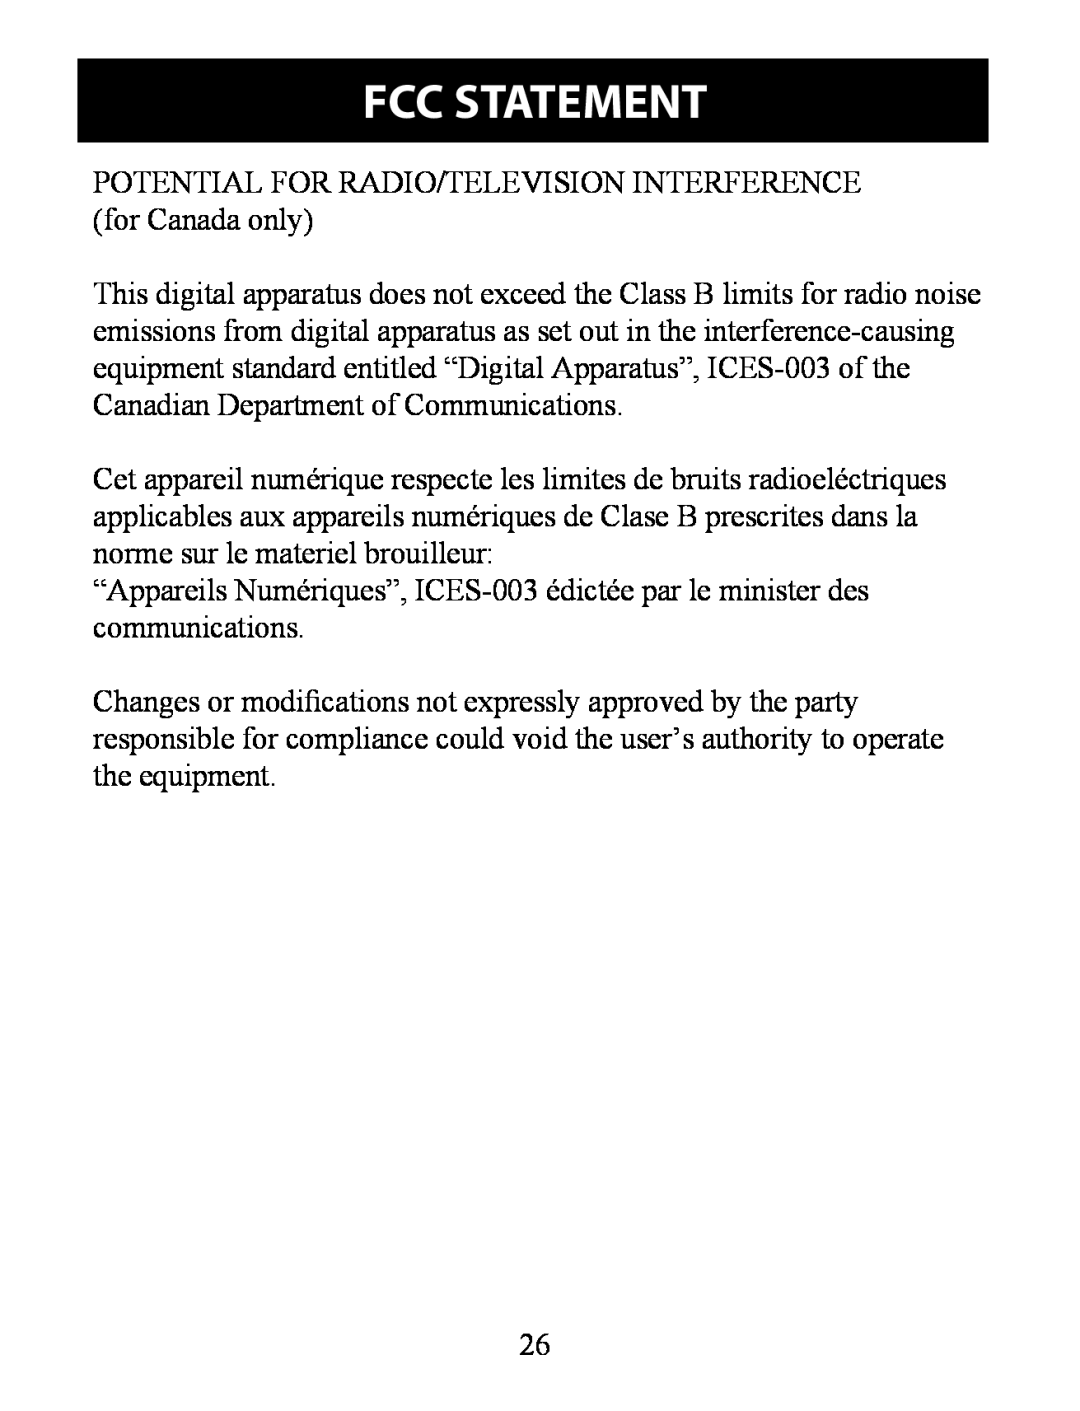 Omron HJ-324U instruction manual Fcc Statement, POTENTIAL FOR RADIO/TELEVISION INTERFERENCE for Canada only 